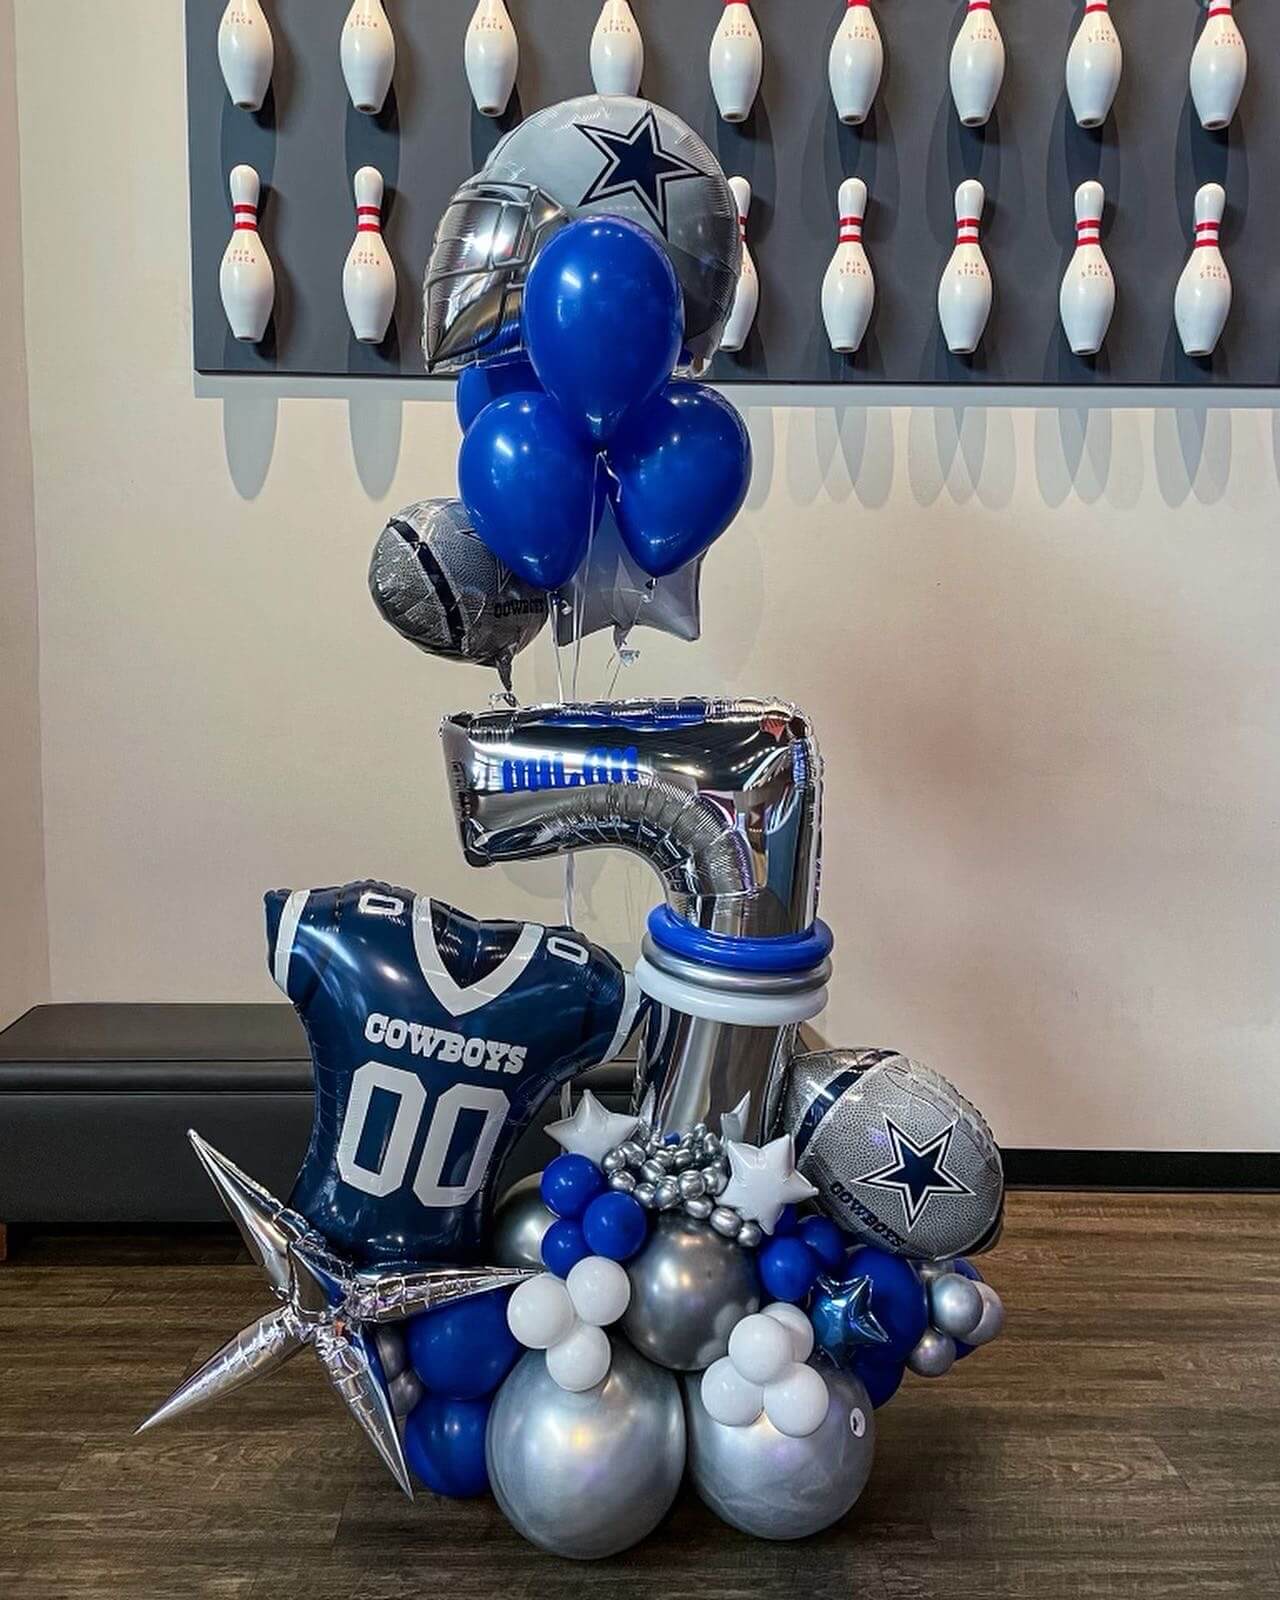 Sophia's Party Creations - Making the perfect entrance for Texas Title  Company's grand opening with a beautiful outdoor balloon Garland  #sophiaspartycreations #outdoordecor #balloonlove #balloonarch  #grandopening #titlecompany #mckinneybusiness